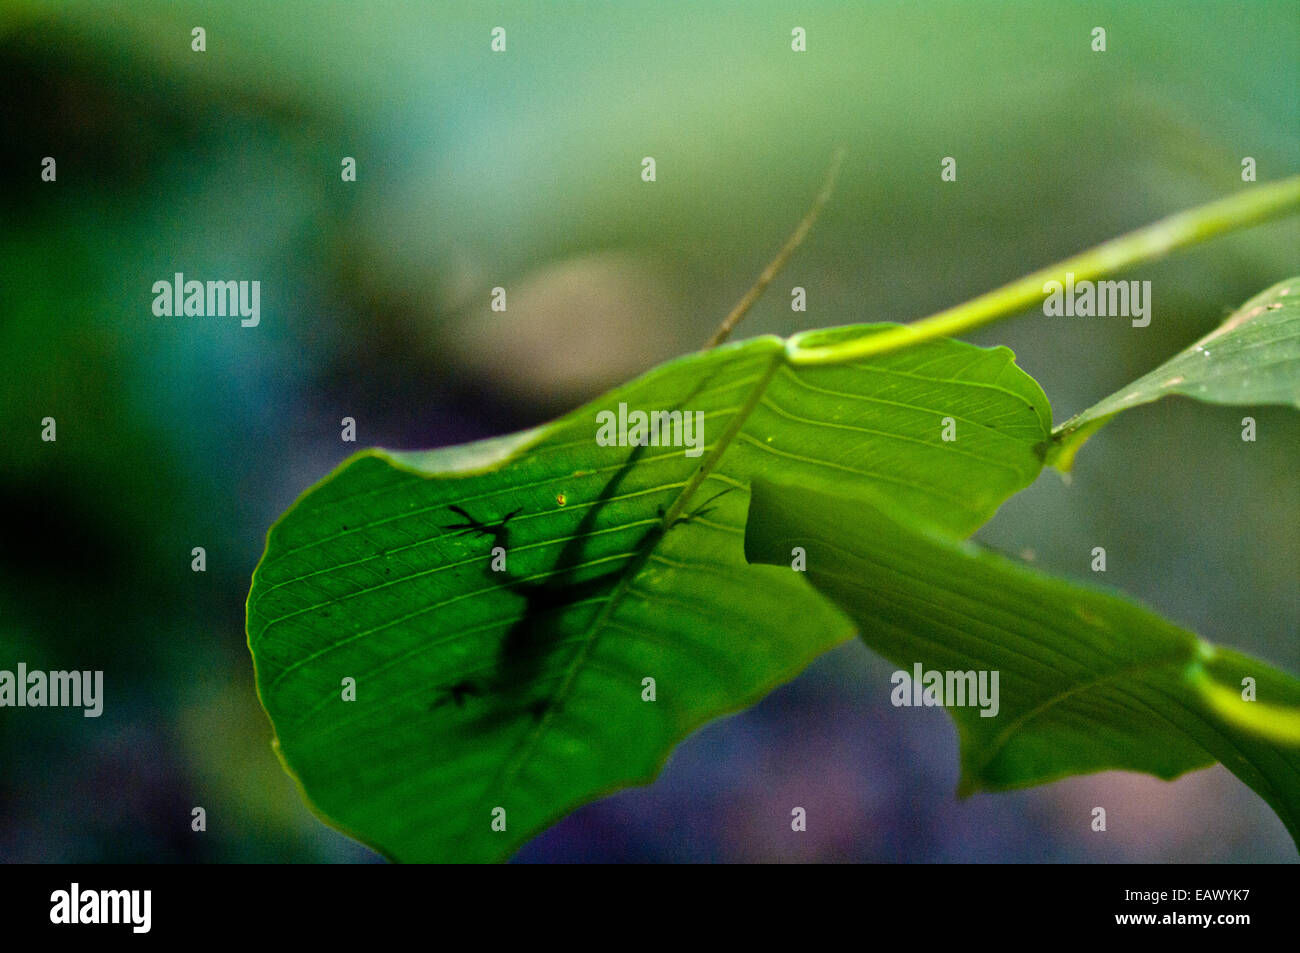 The silhouette of an Anole basking in the sun on a large rainforest leaf. Stock Photo